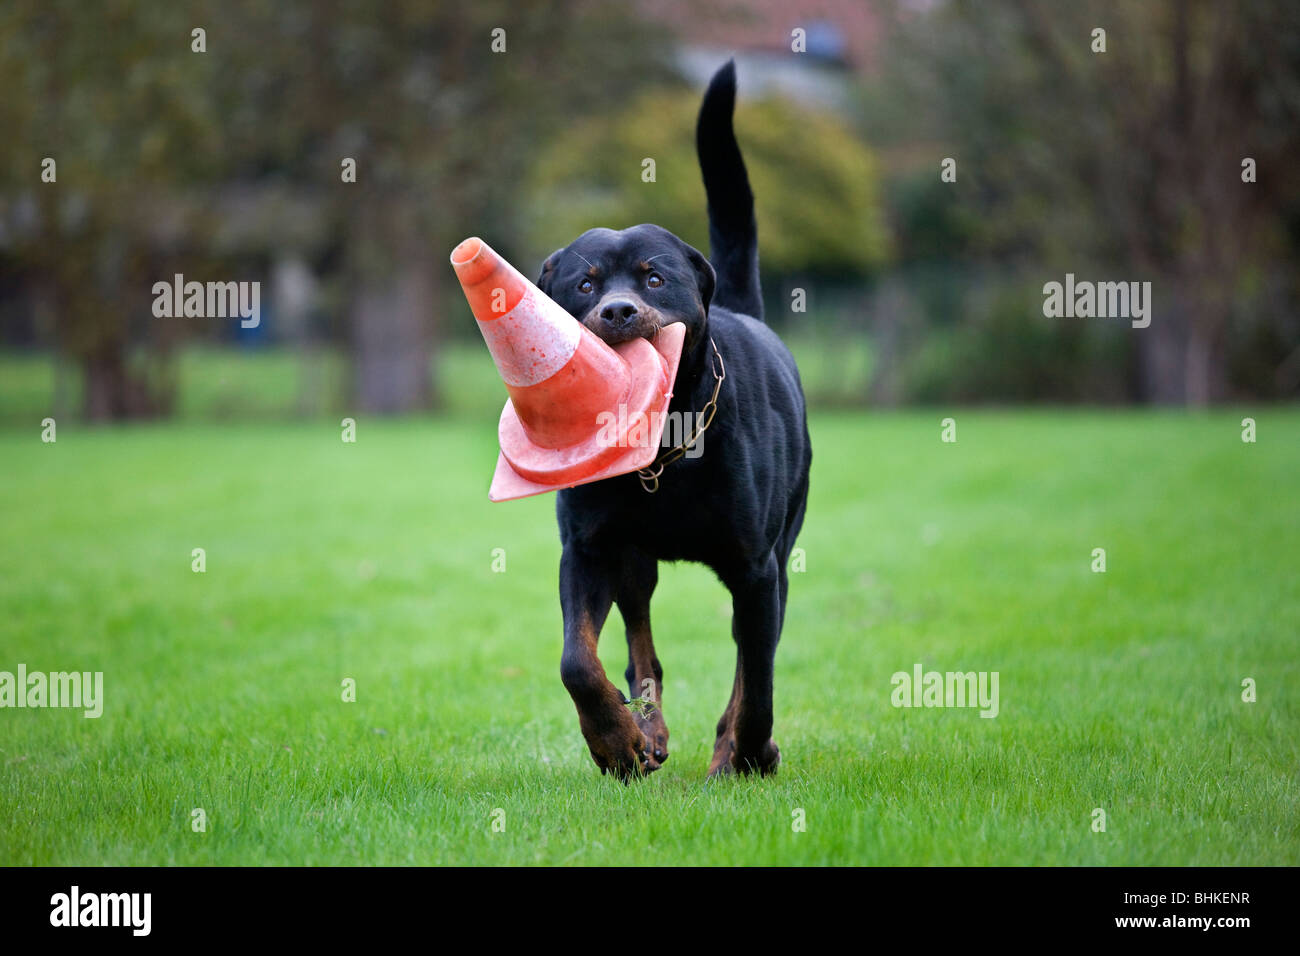 Rottweiler (Canis lupus familiaris) running with traffic cone in mouth Stock Photo